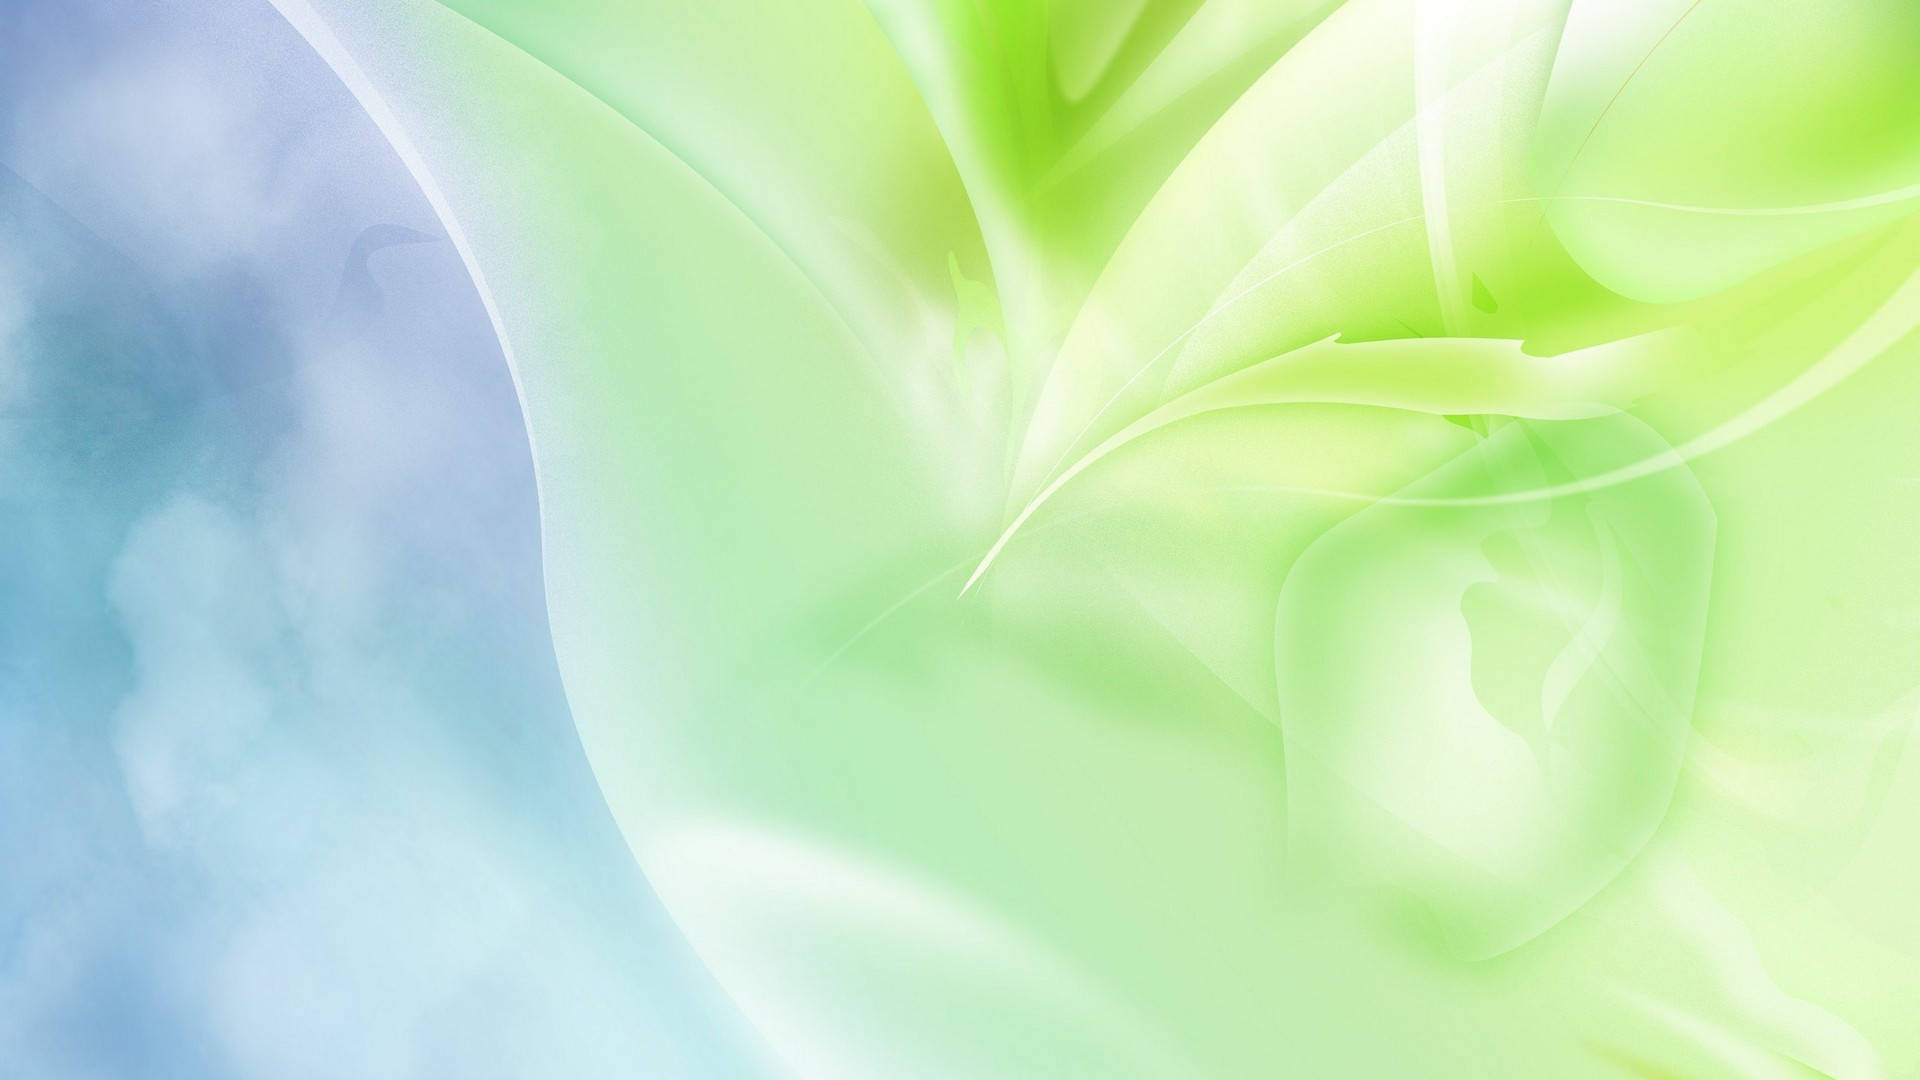 Super Light Green And Blue Abstract Picture